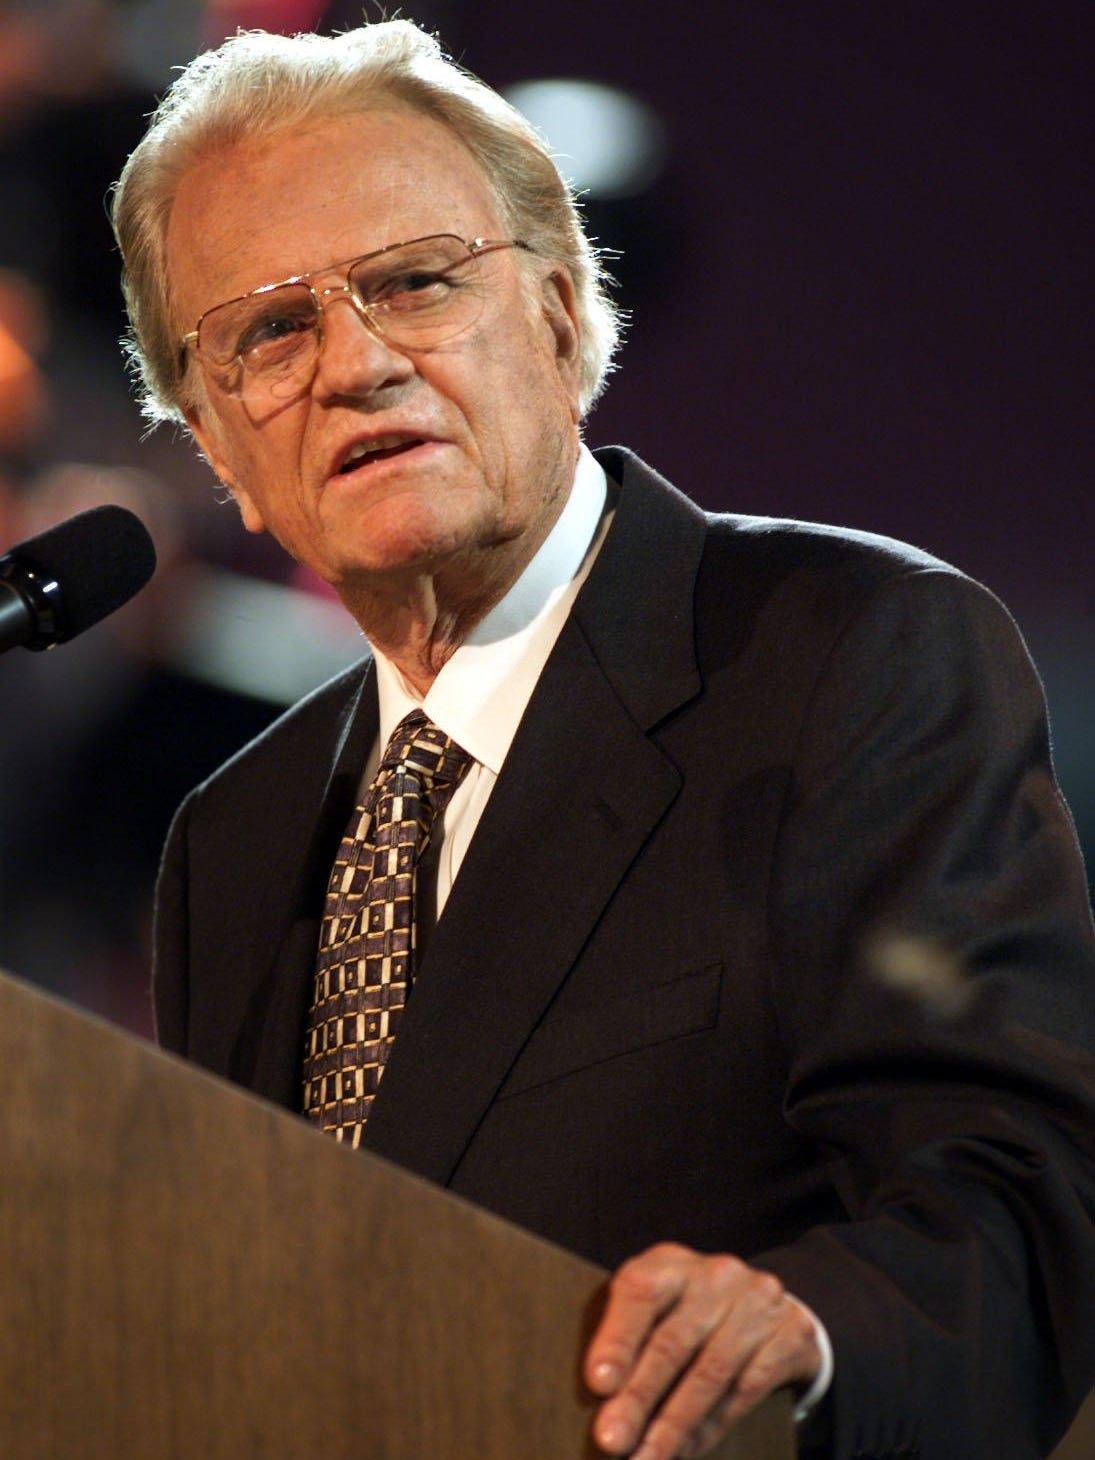 DOWNLOAD MP3: A CURE FOR HEART TROUBLE By Evangelist Billy Graham. (sermon) 17